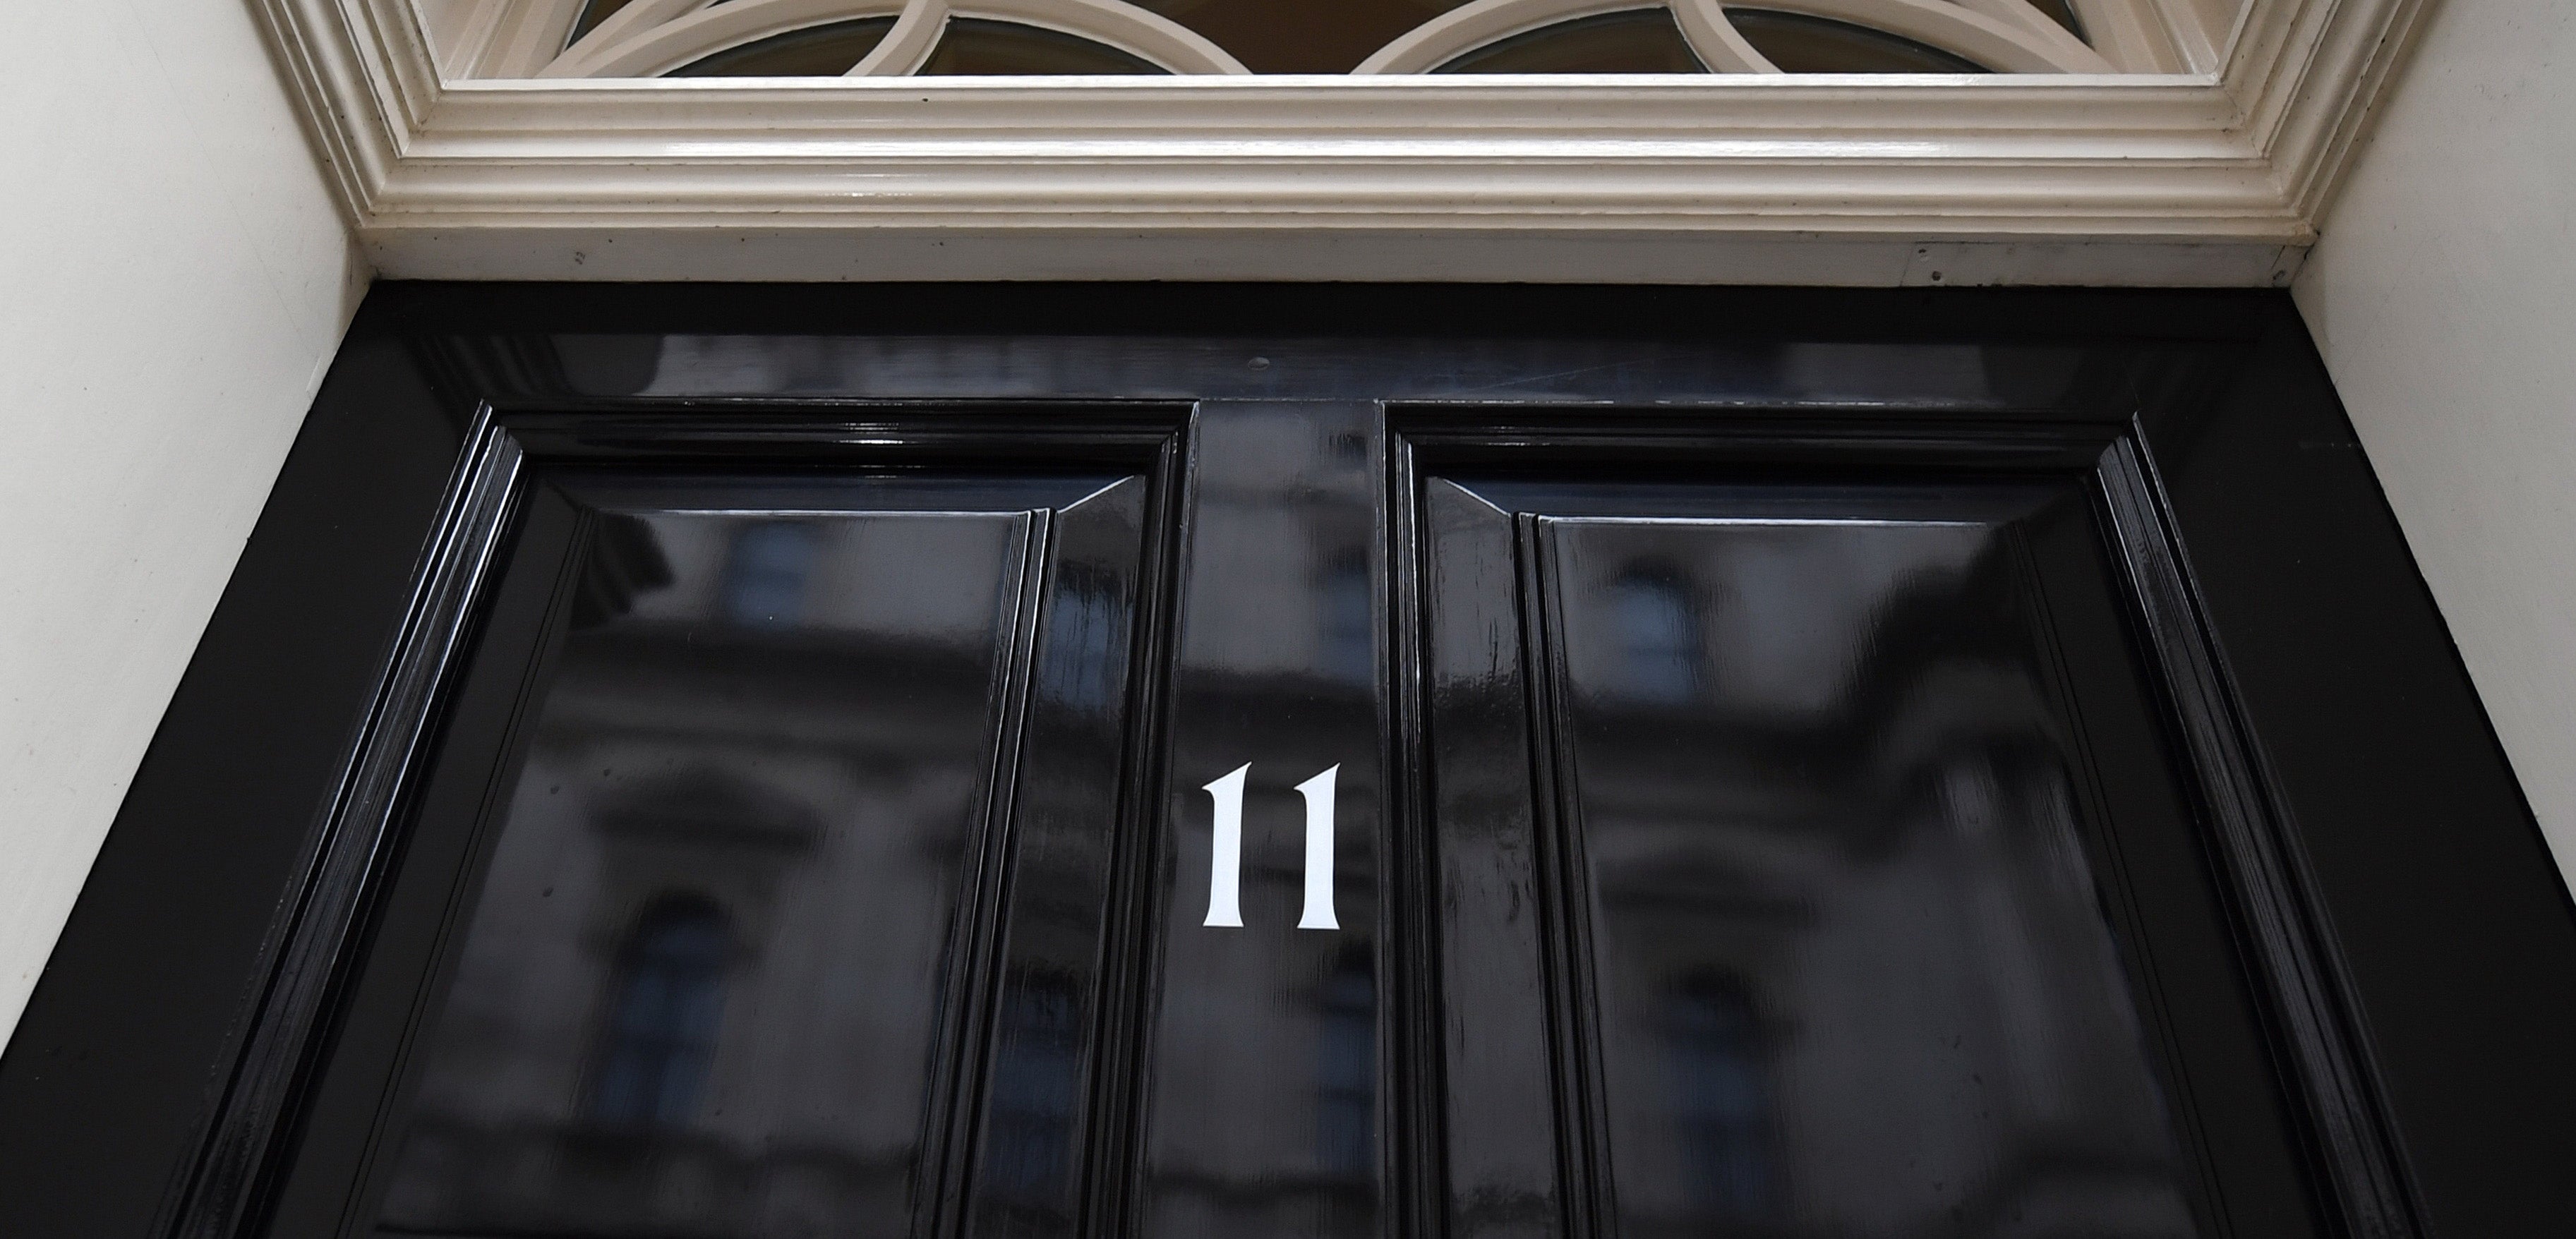 Lord Geidt ruled in May that Boris Johnson had ‘unwisely’ allowed the refurbishment of his Downing Street flat at No 11 to go ahead without ‘more rigorous regard for how this would be funded’ (Victoria Jones/PA)